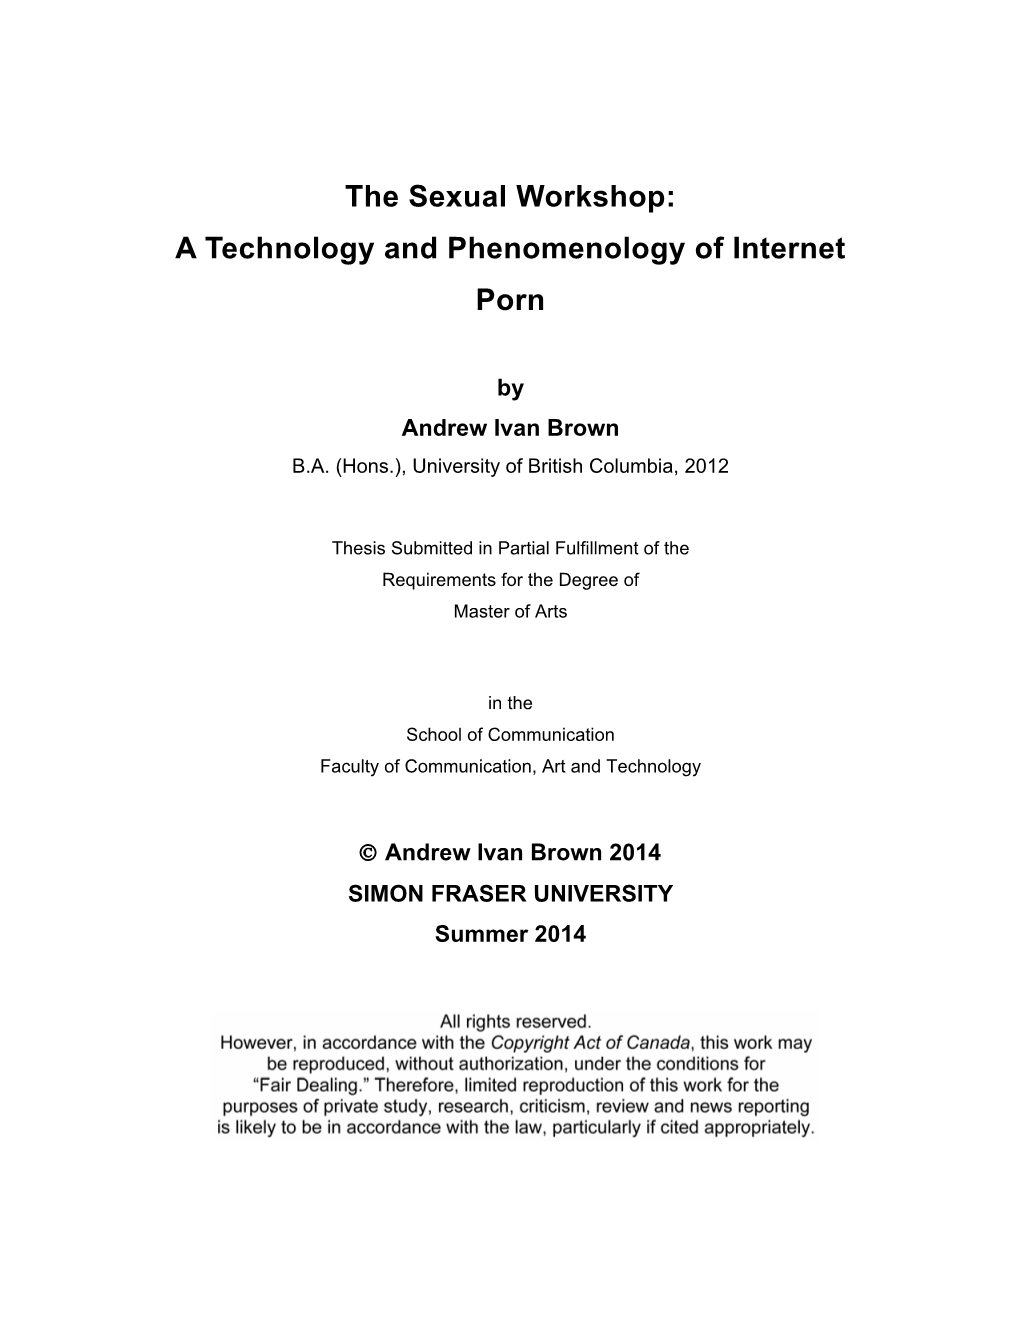 The Sexual Workshop: a Technology and Phenomenology of Internet Porn